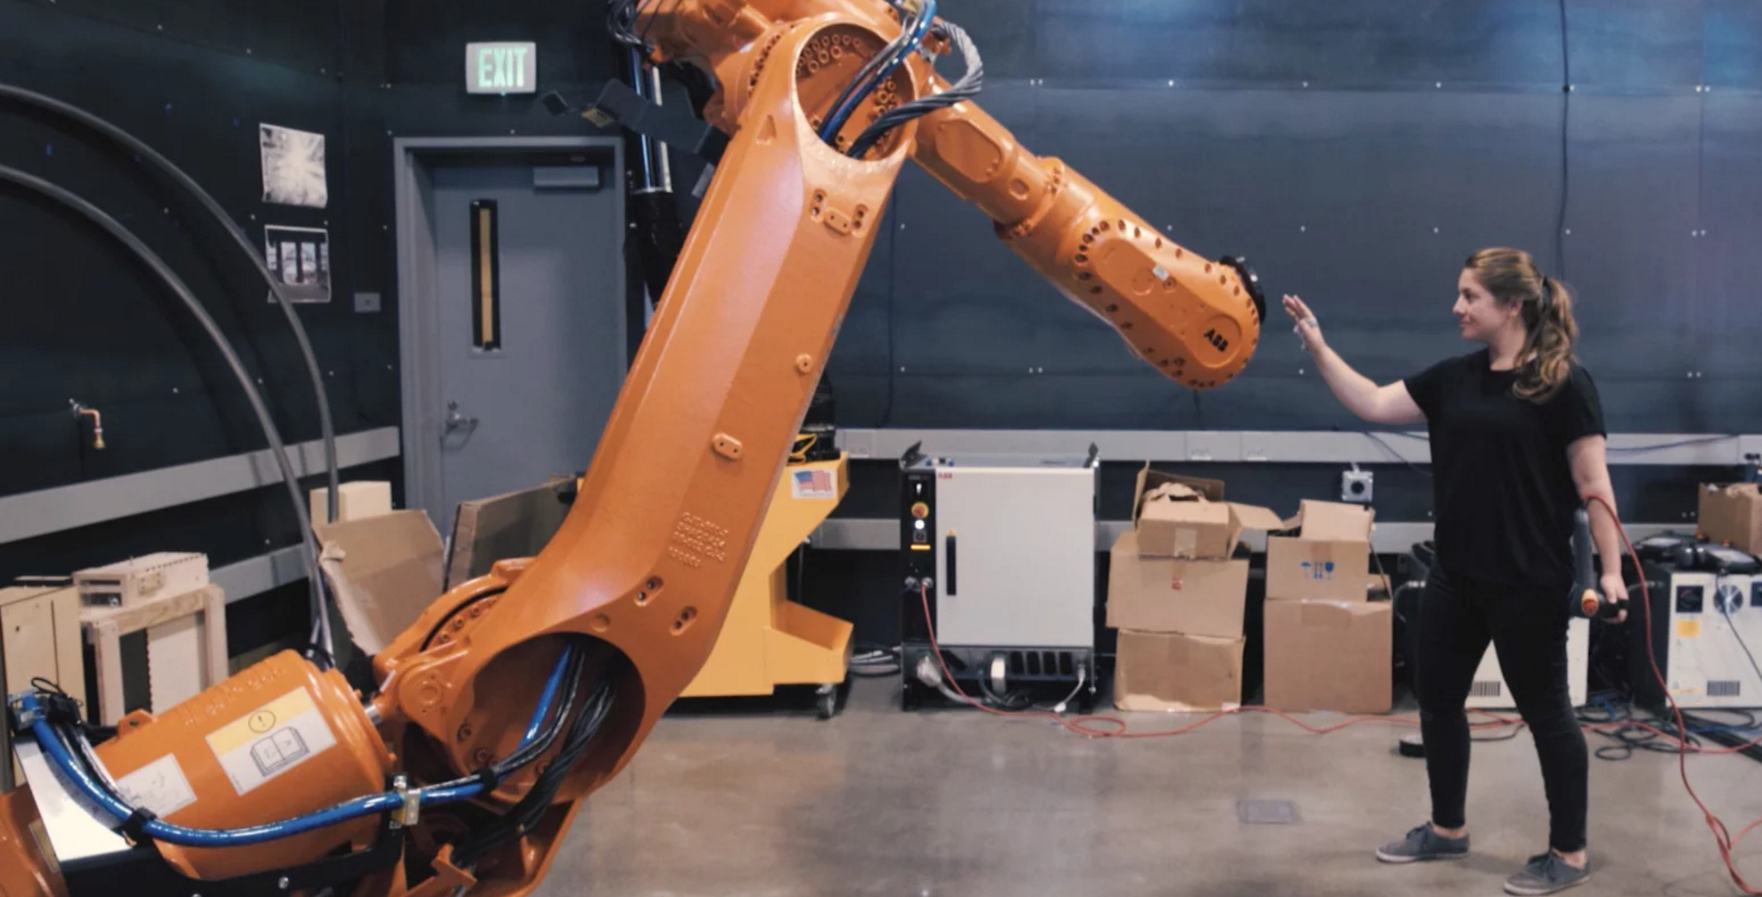 Engineer Develops Quipt to Tame Robots With Gesture-Based Control Software